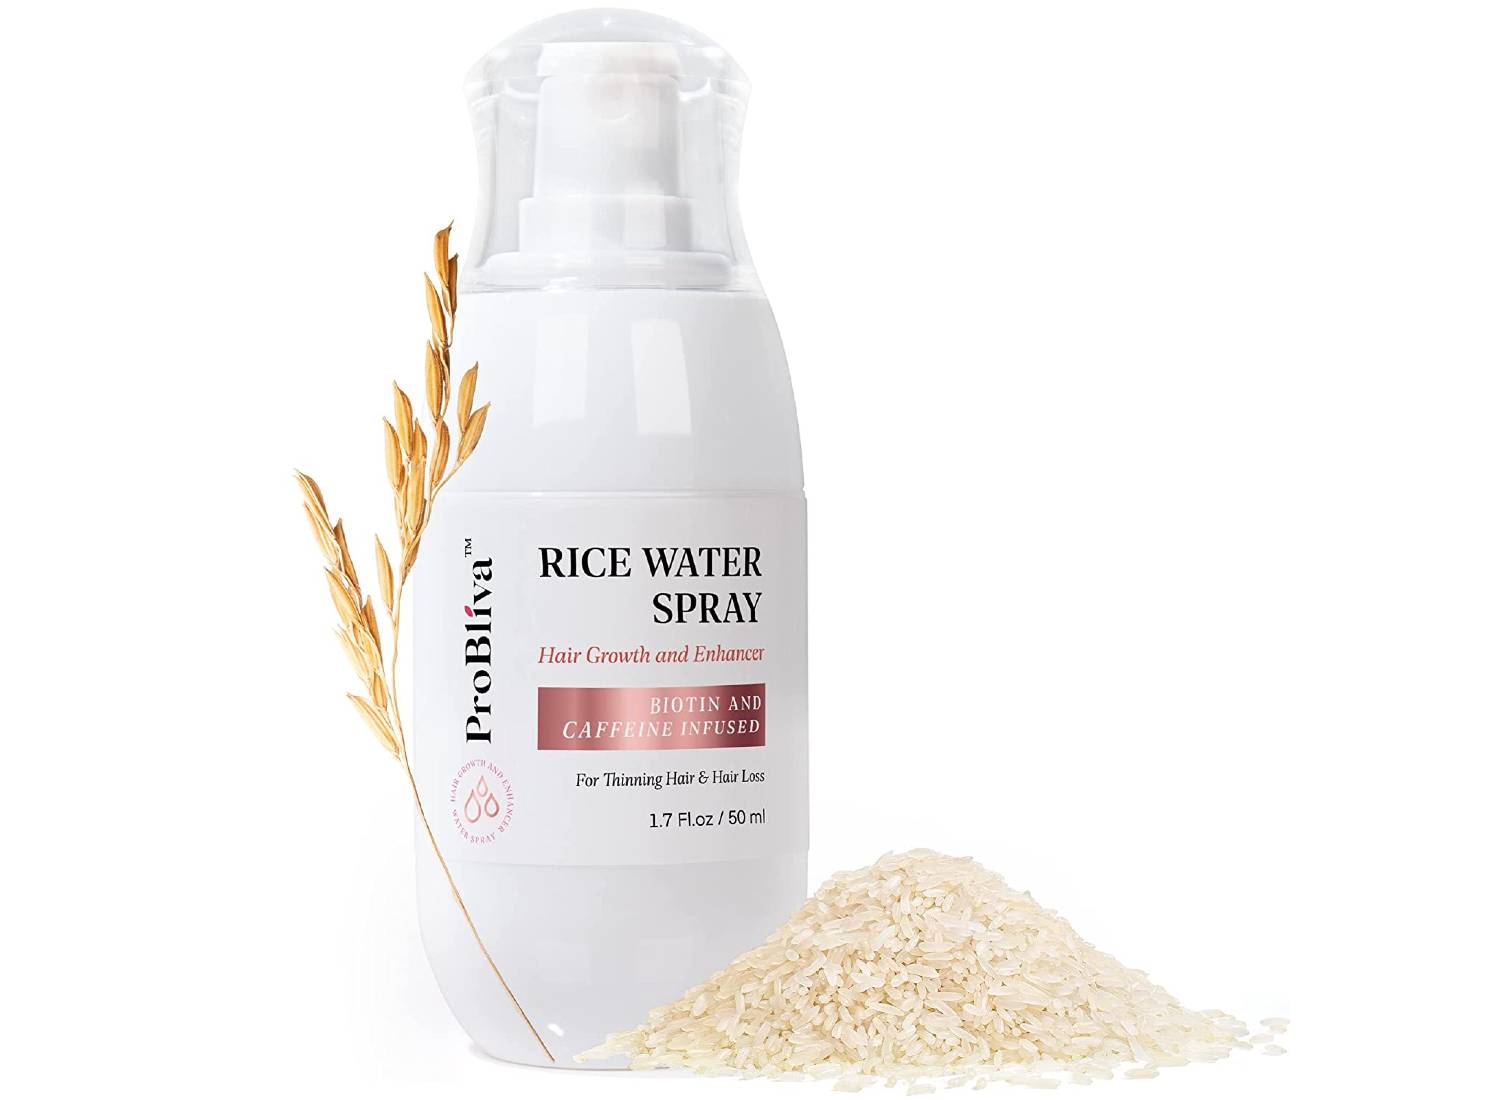 A white bottle of Probliva's rice water leave-in spray for scalp next to a pile of rice grains